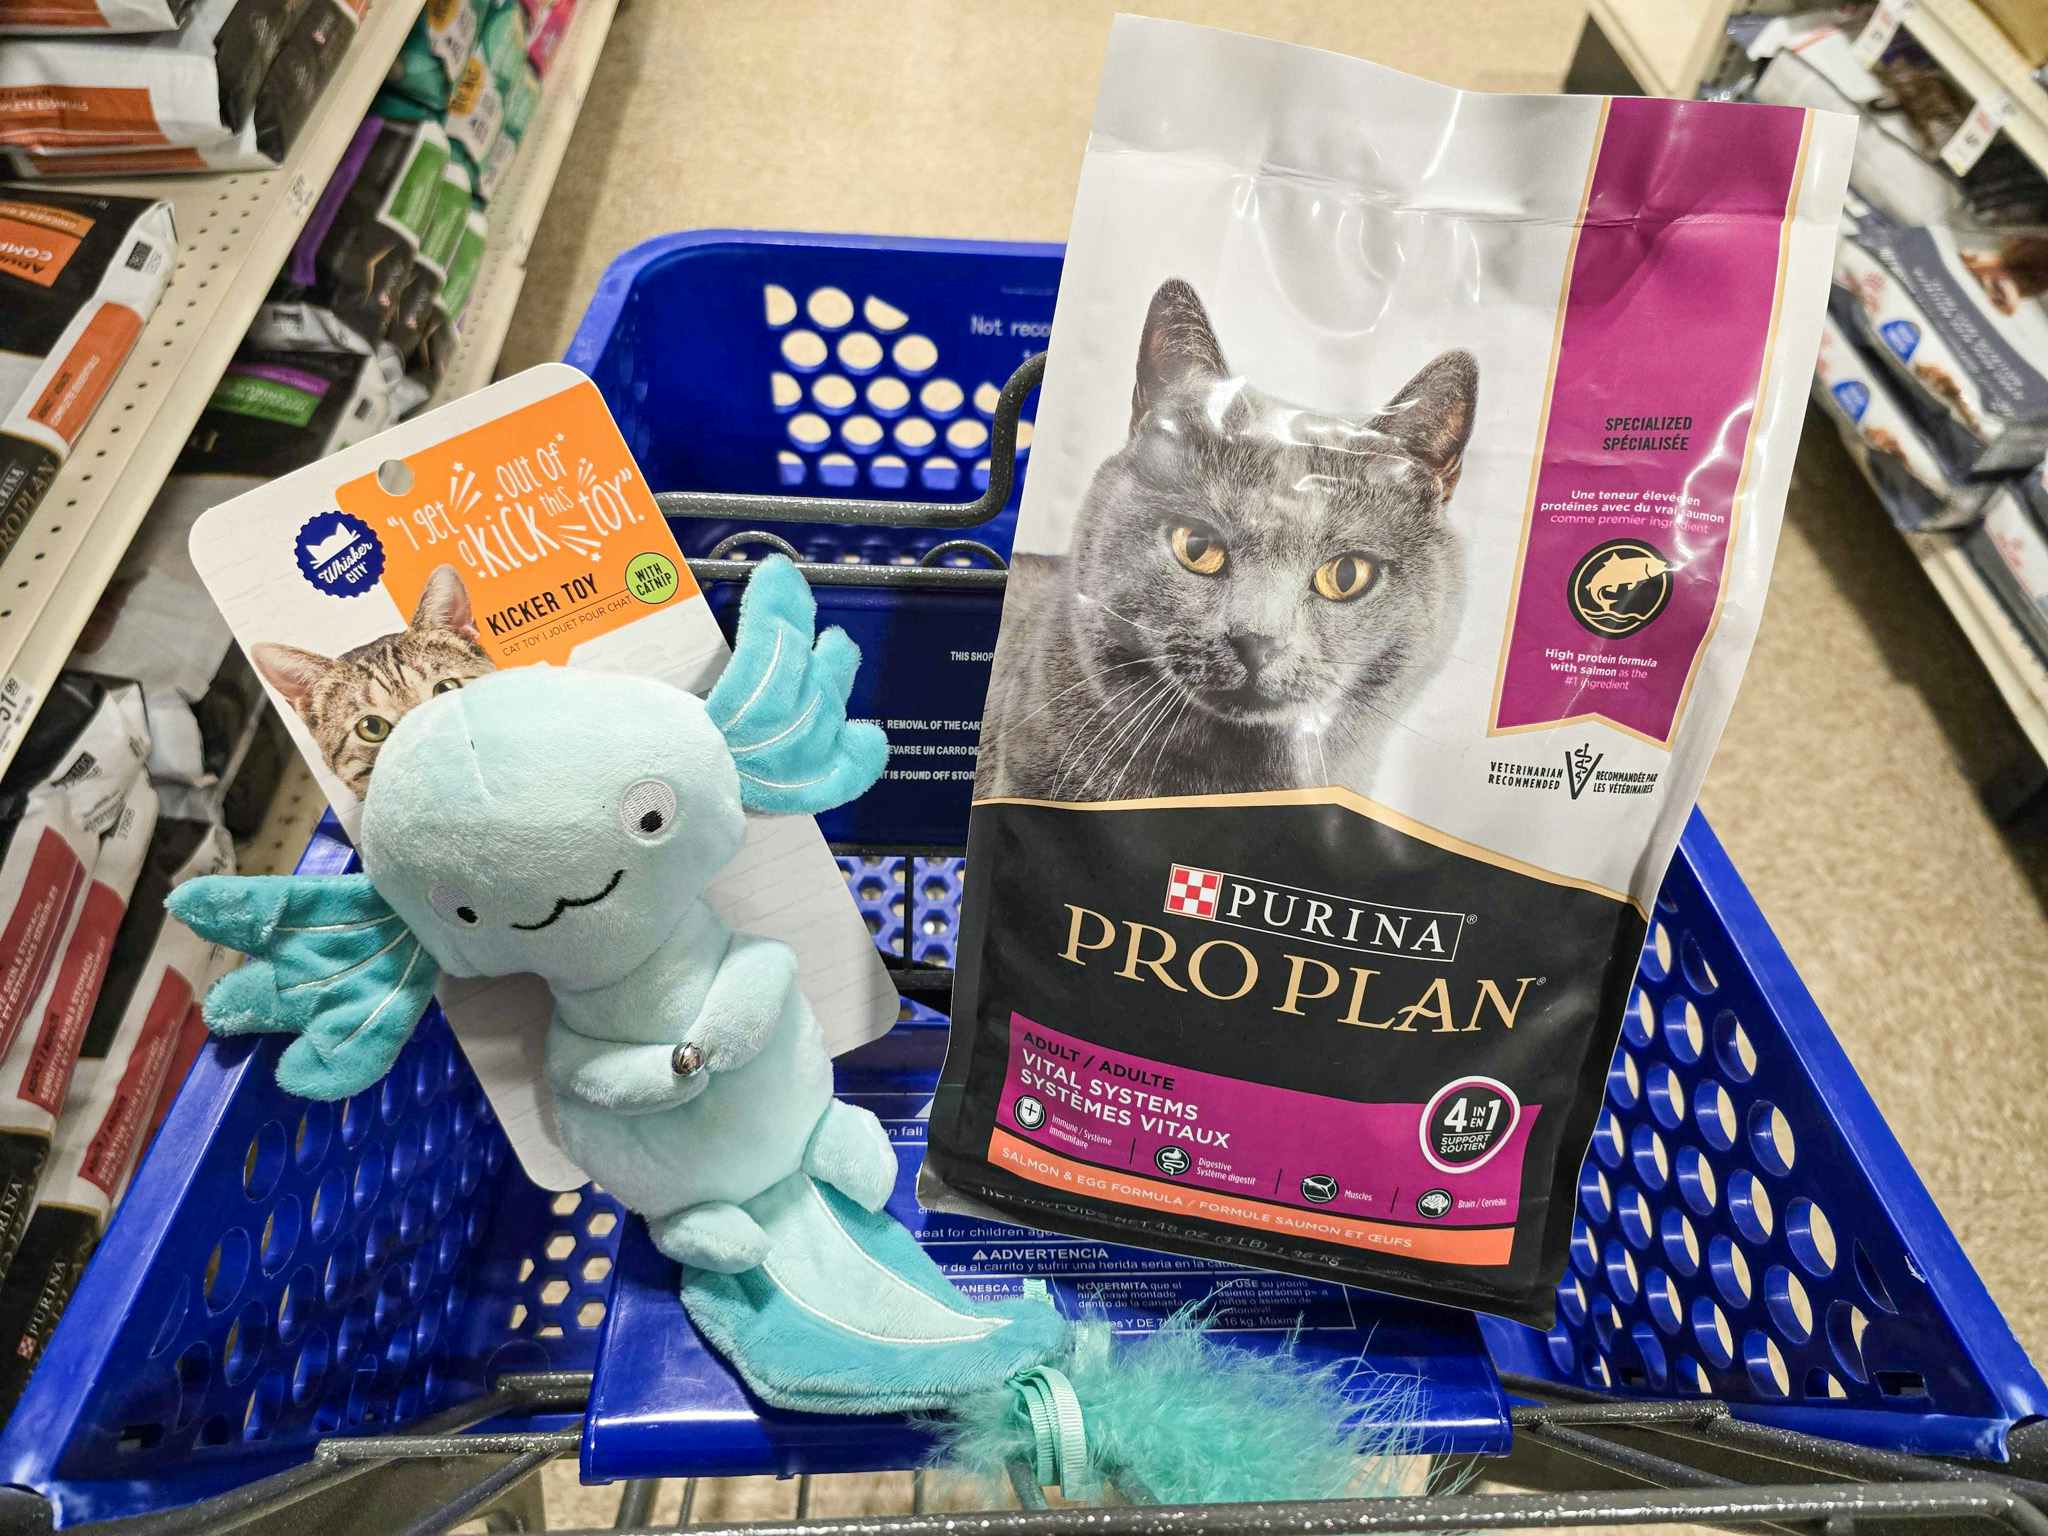 bag of purina pro plan cat food and a cat toy in a cart